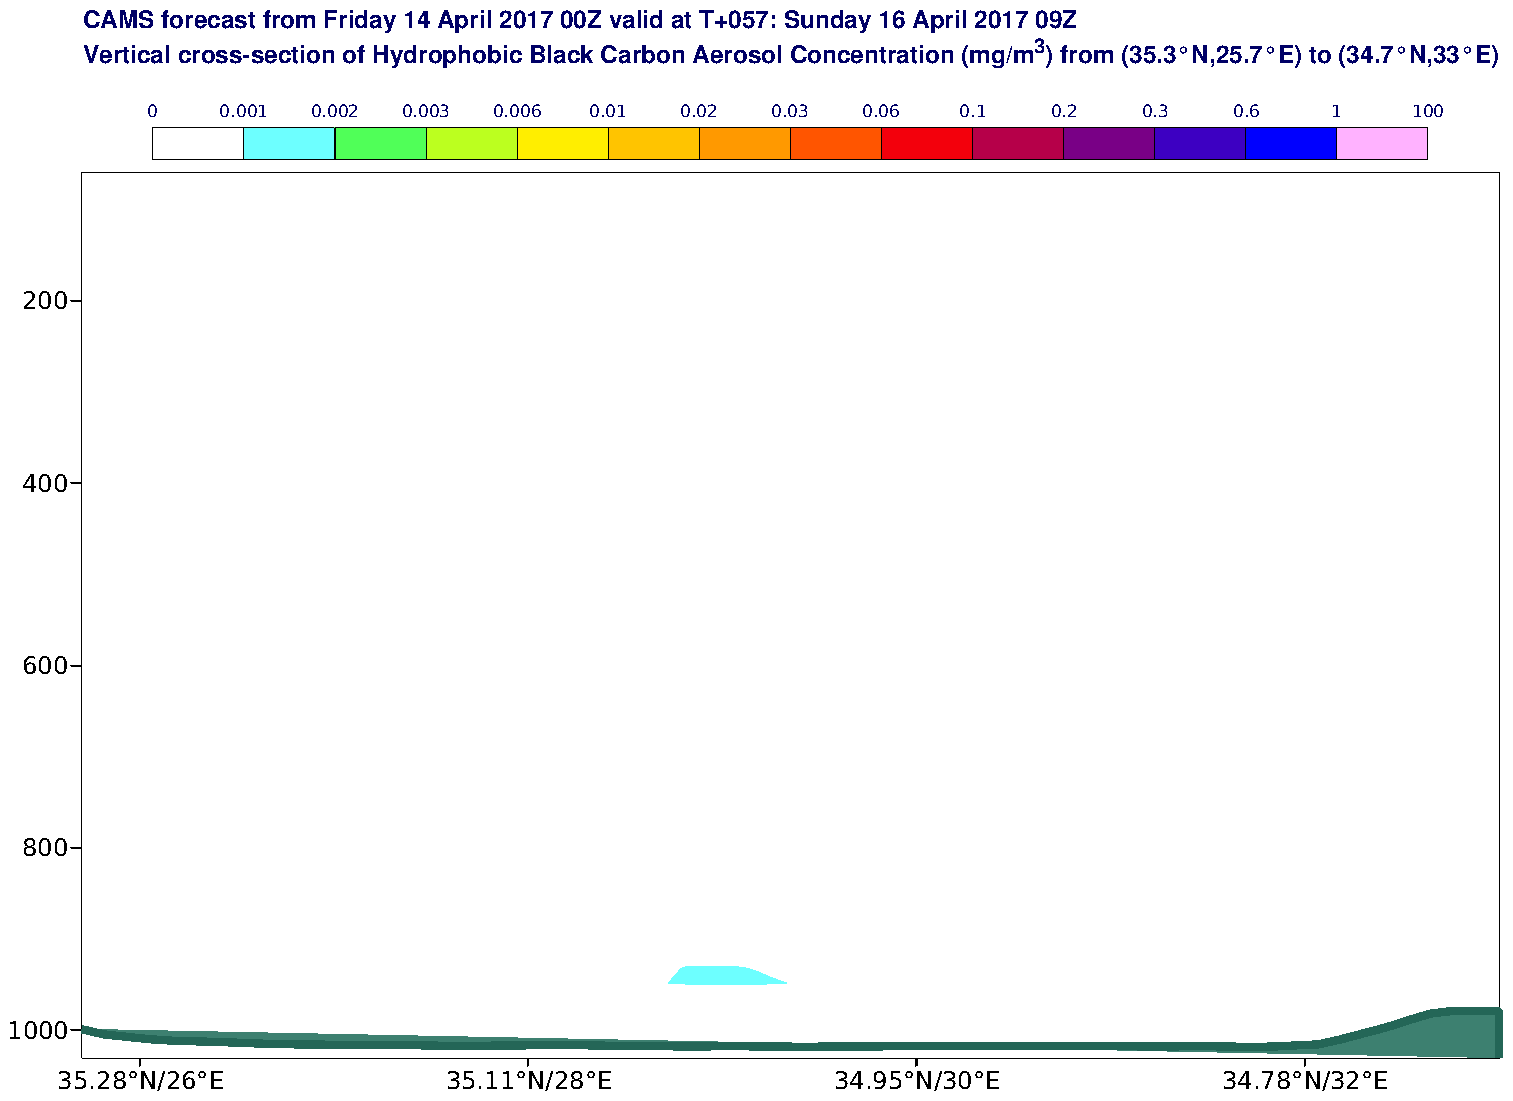 Vertical cross-section of Hydrophobic Black Carbon Aerosol Concentration (mg/m3) valid at T57 - 2017-04-16 09:00